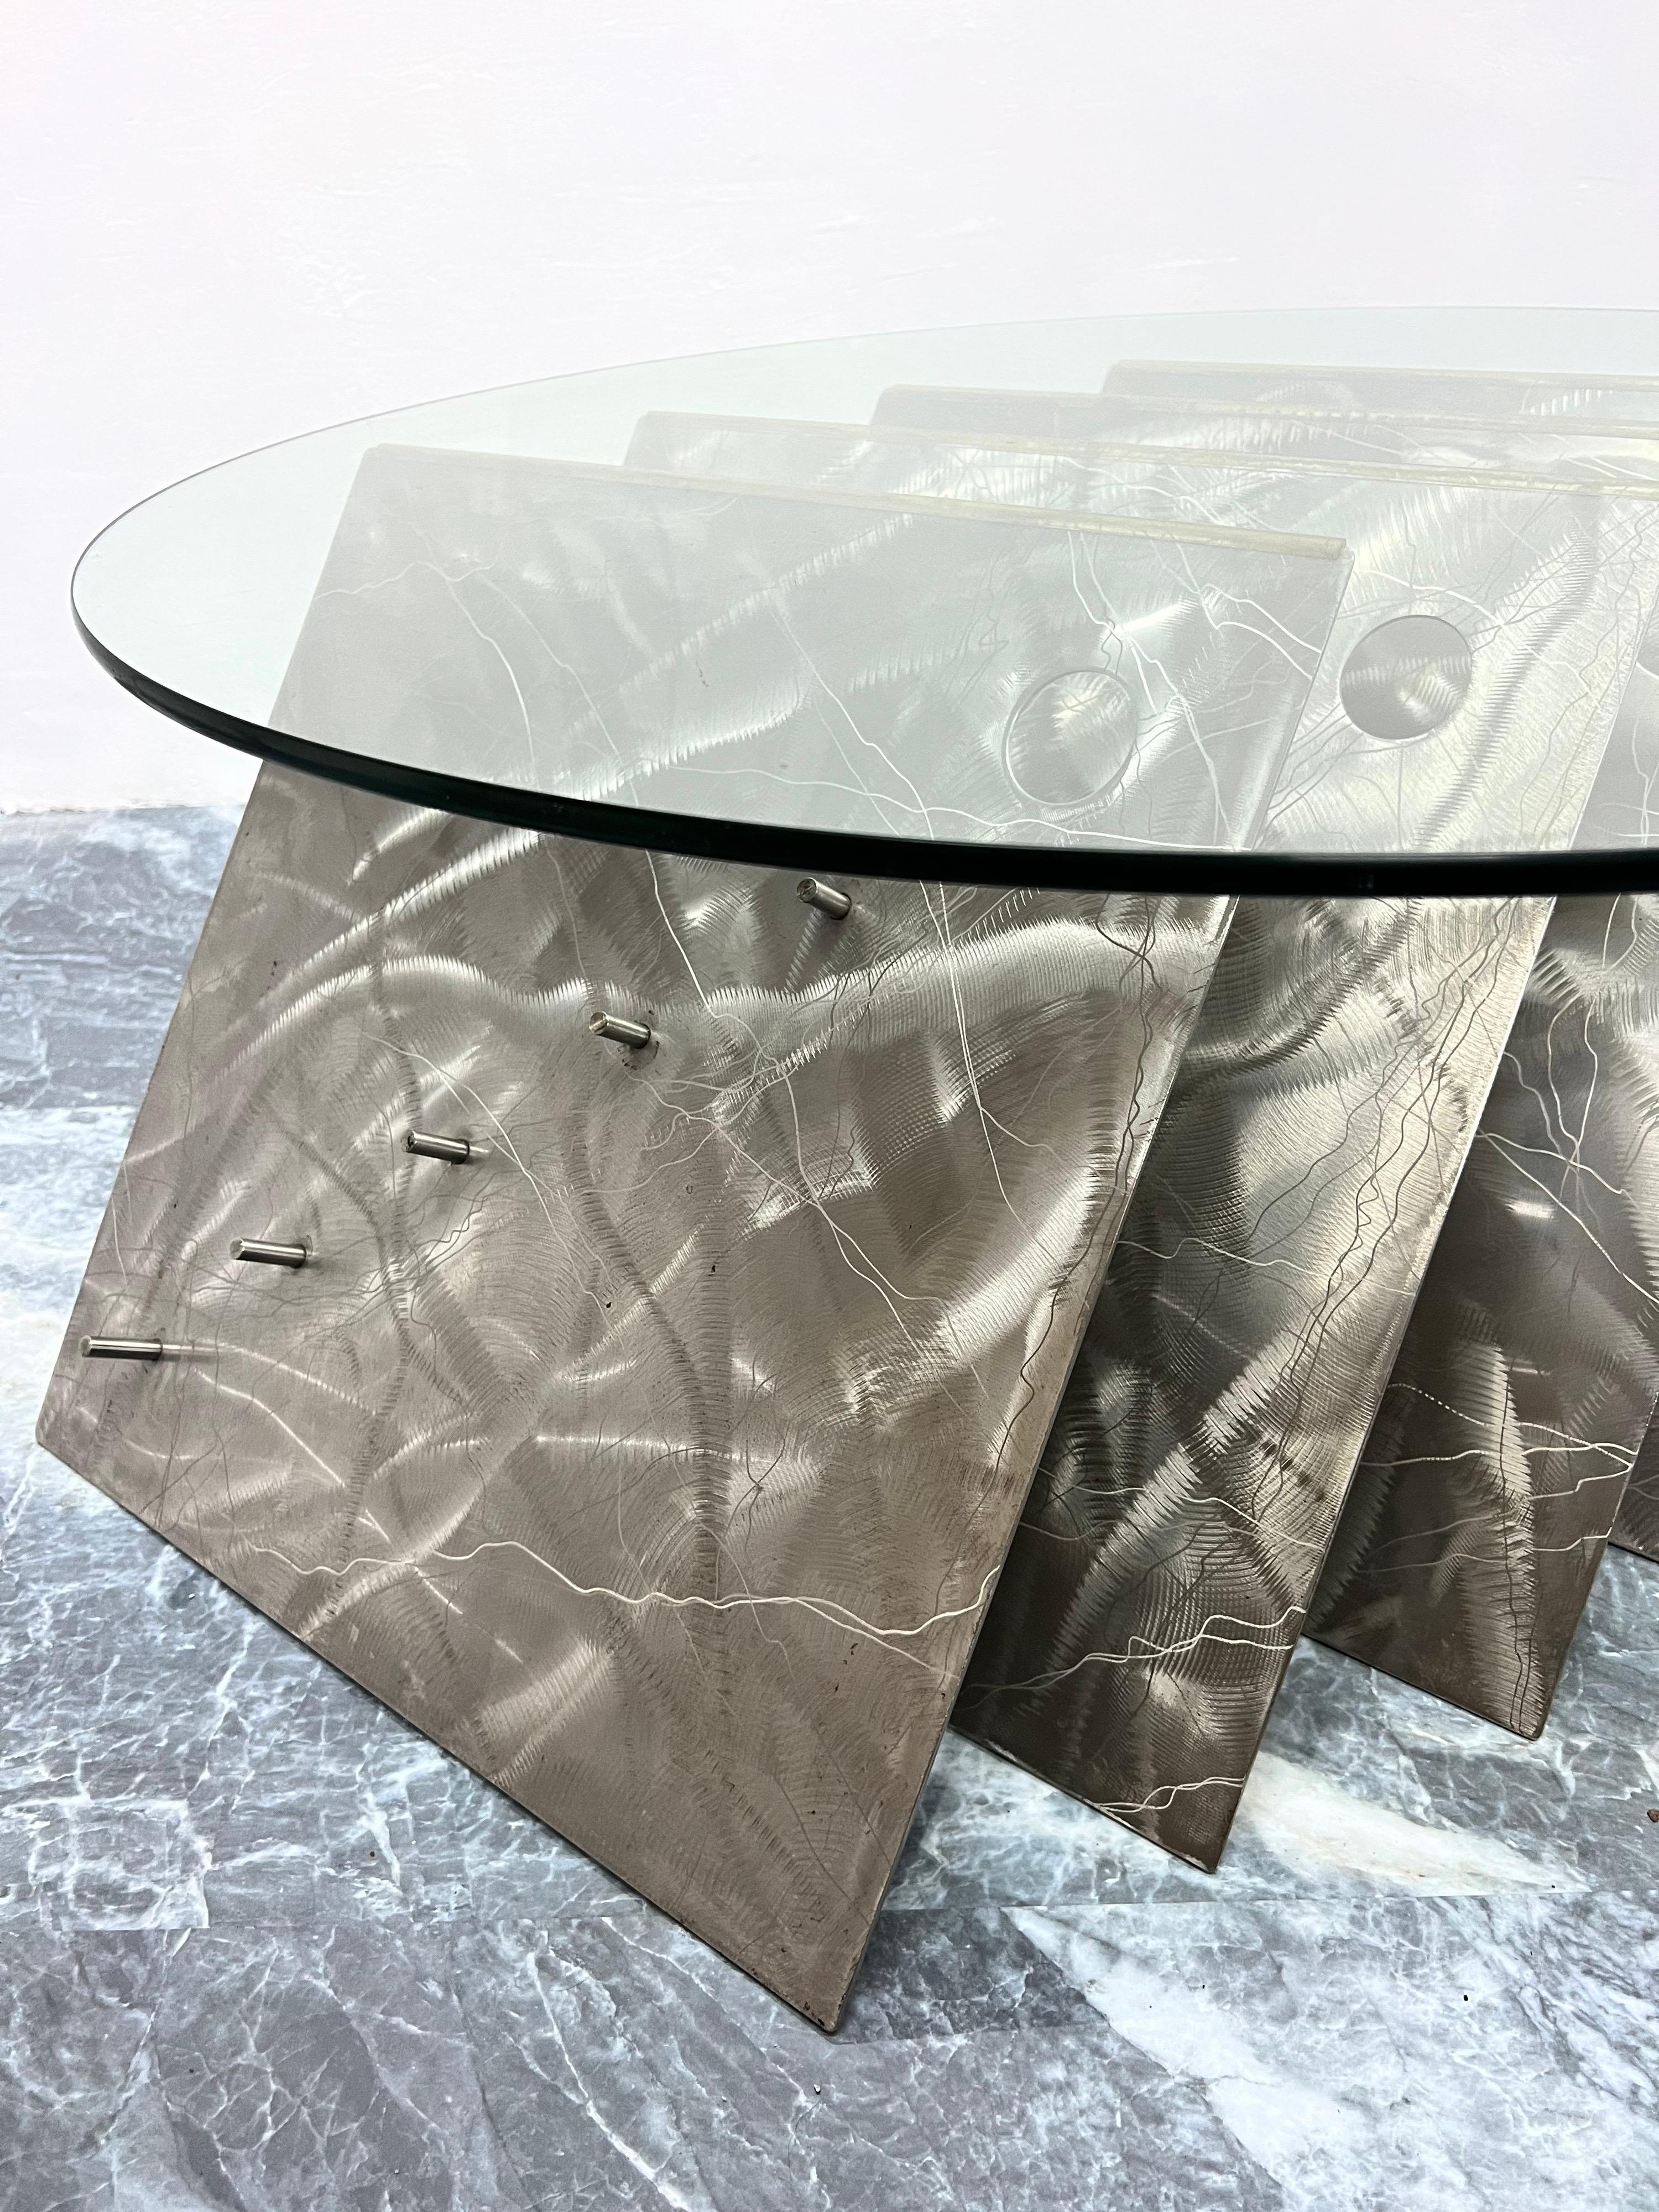 American Contemporary Custom Made Steel and Glass Art Coffee Table, USA 1990s For Sale 7